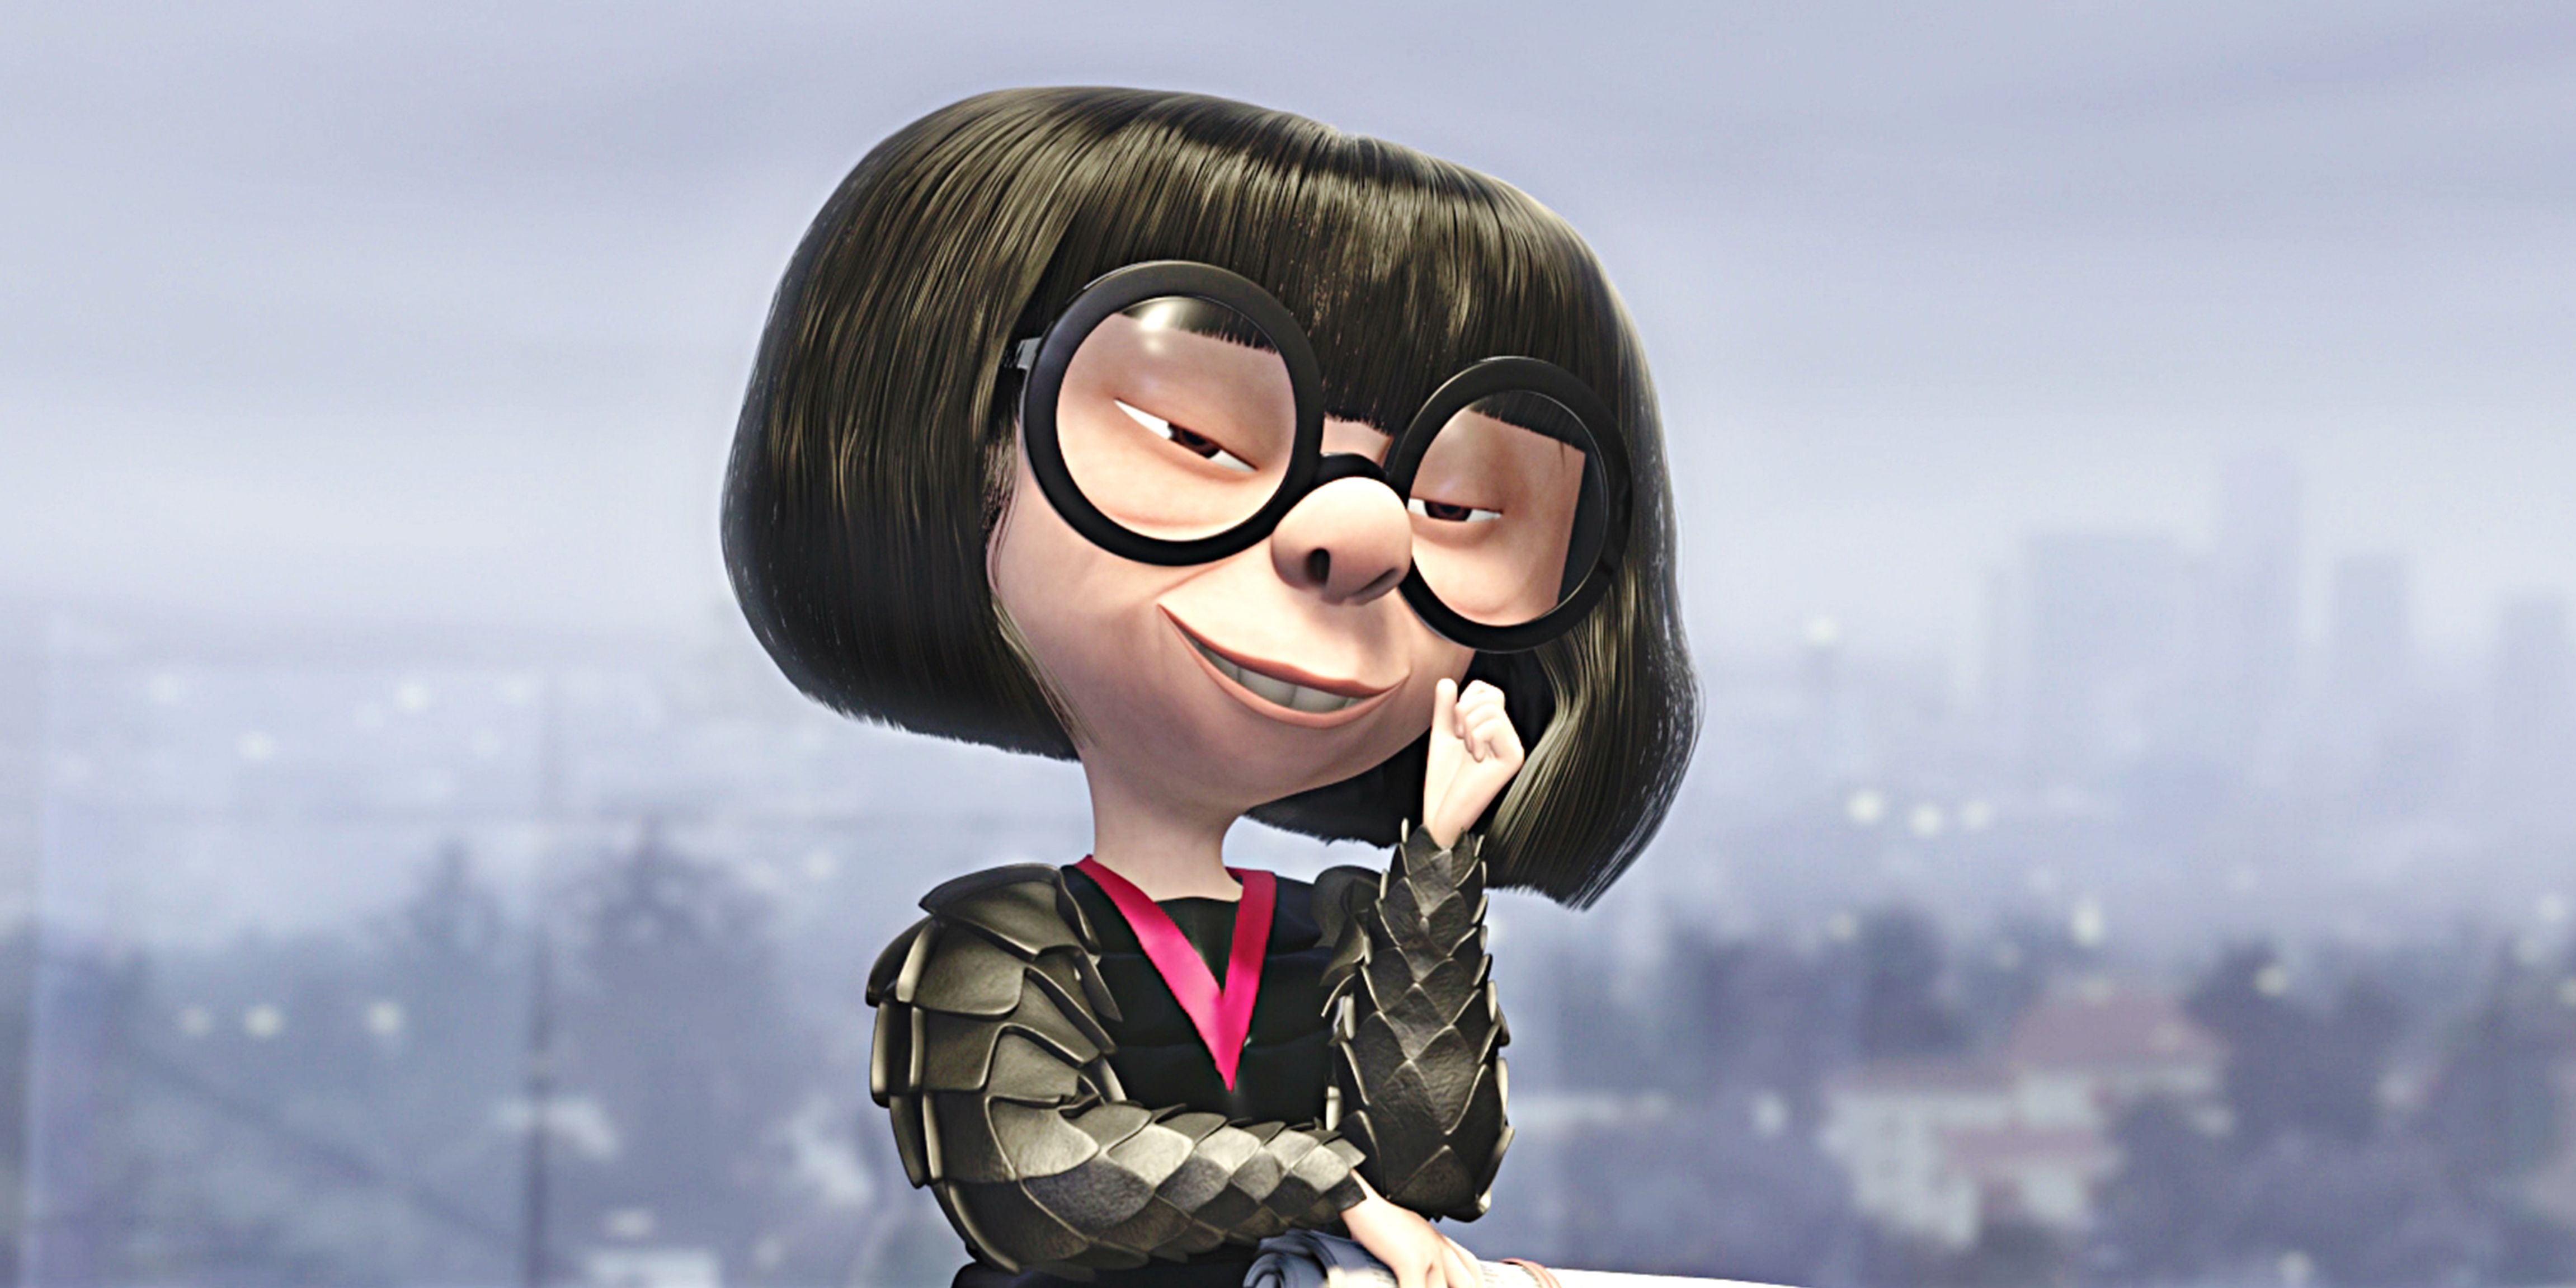 Edna Mode From Pixar's The Incredibles